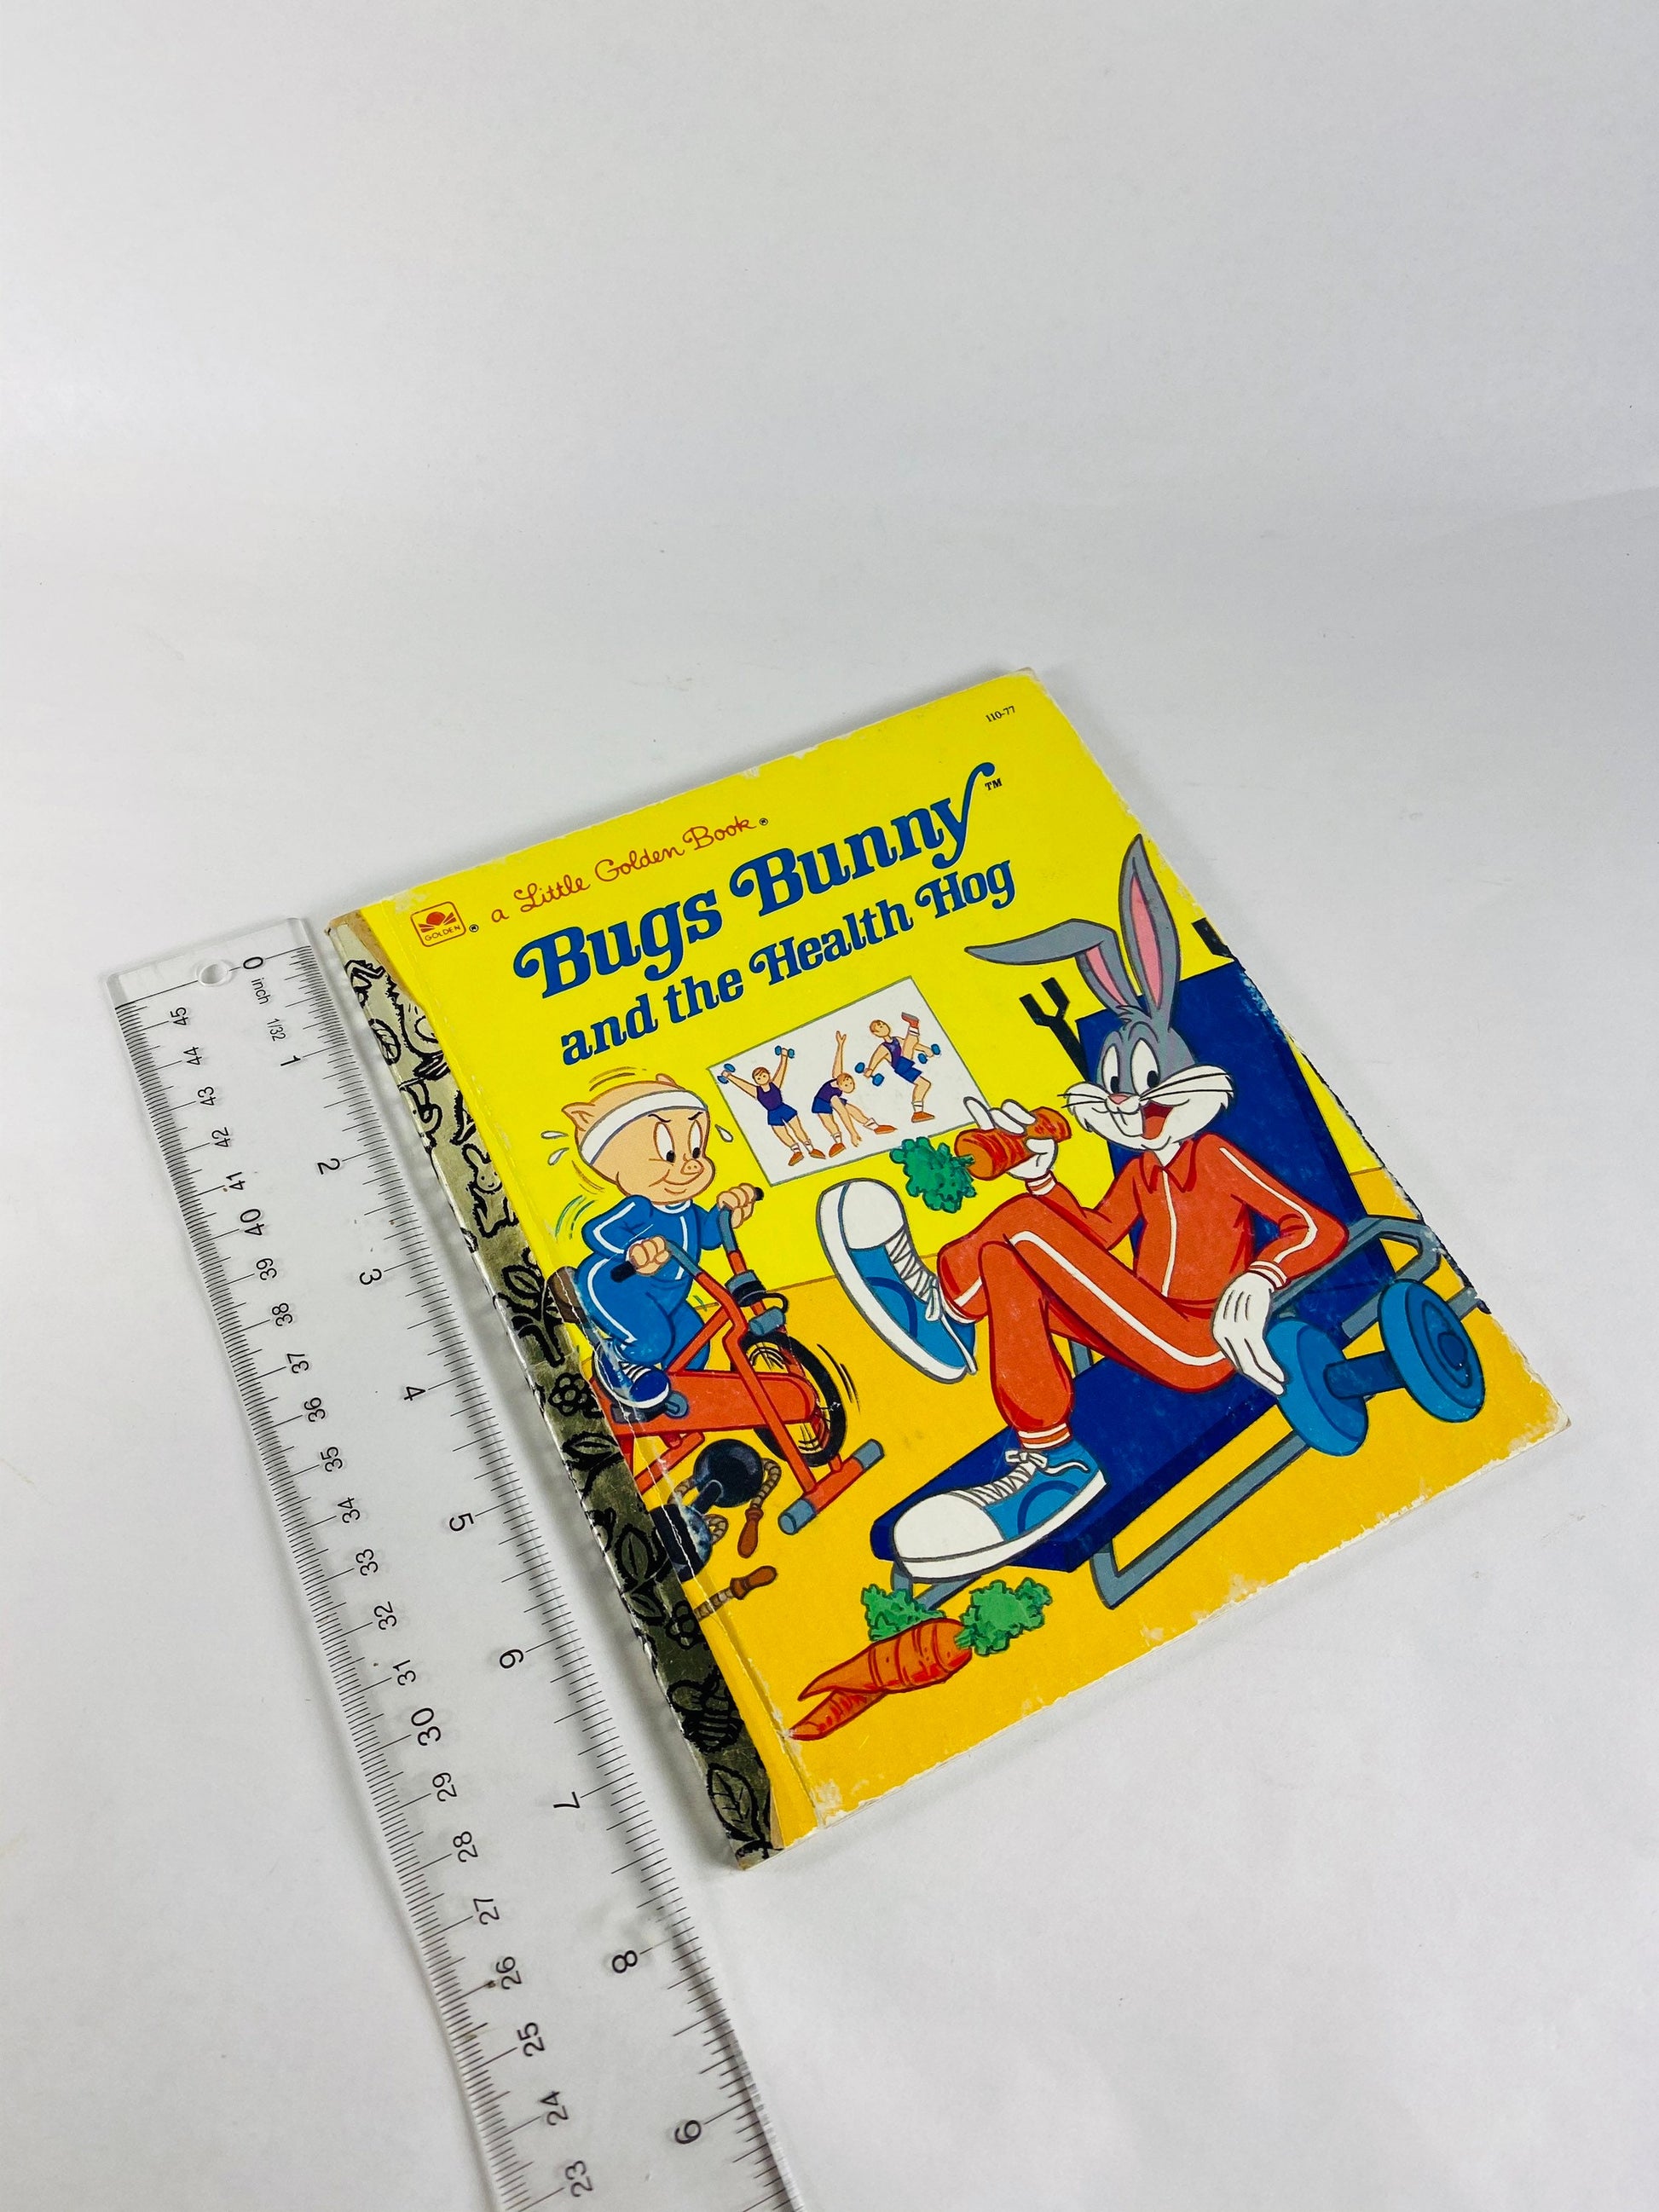 1986 Bugs Bunny and the Health Hog. FIRST EDITION vintage Little Golden Book Looney Tunes